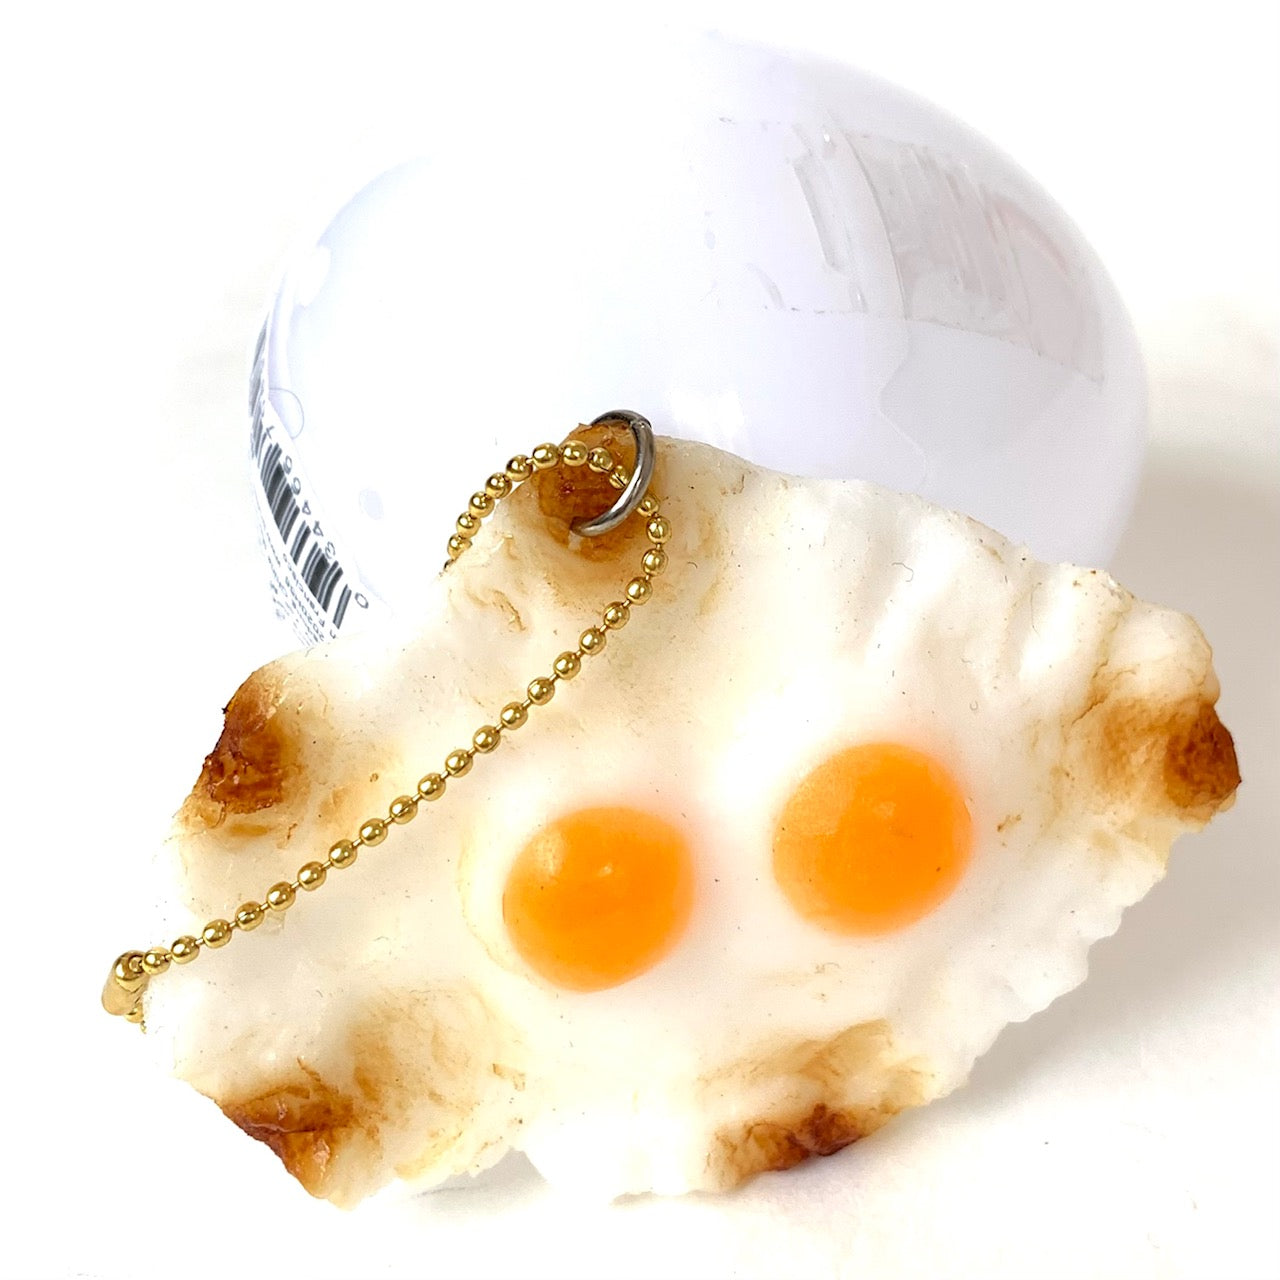 X 70898 Chicken and Eggs Capsule-DISCONTINUED